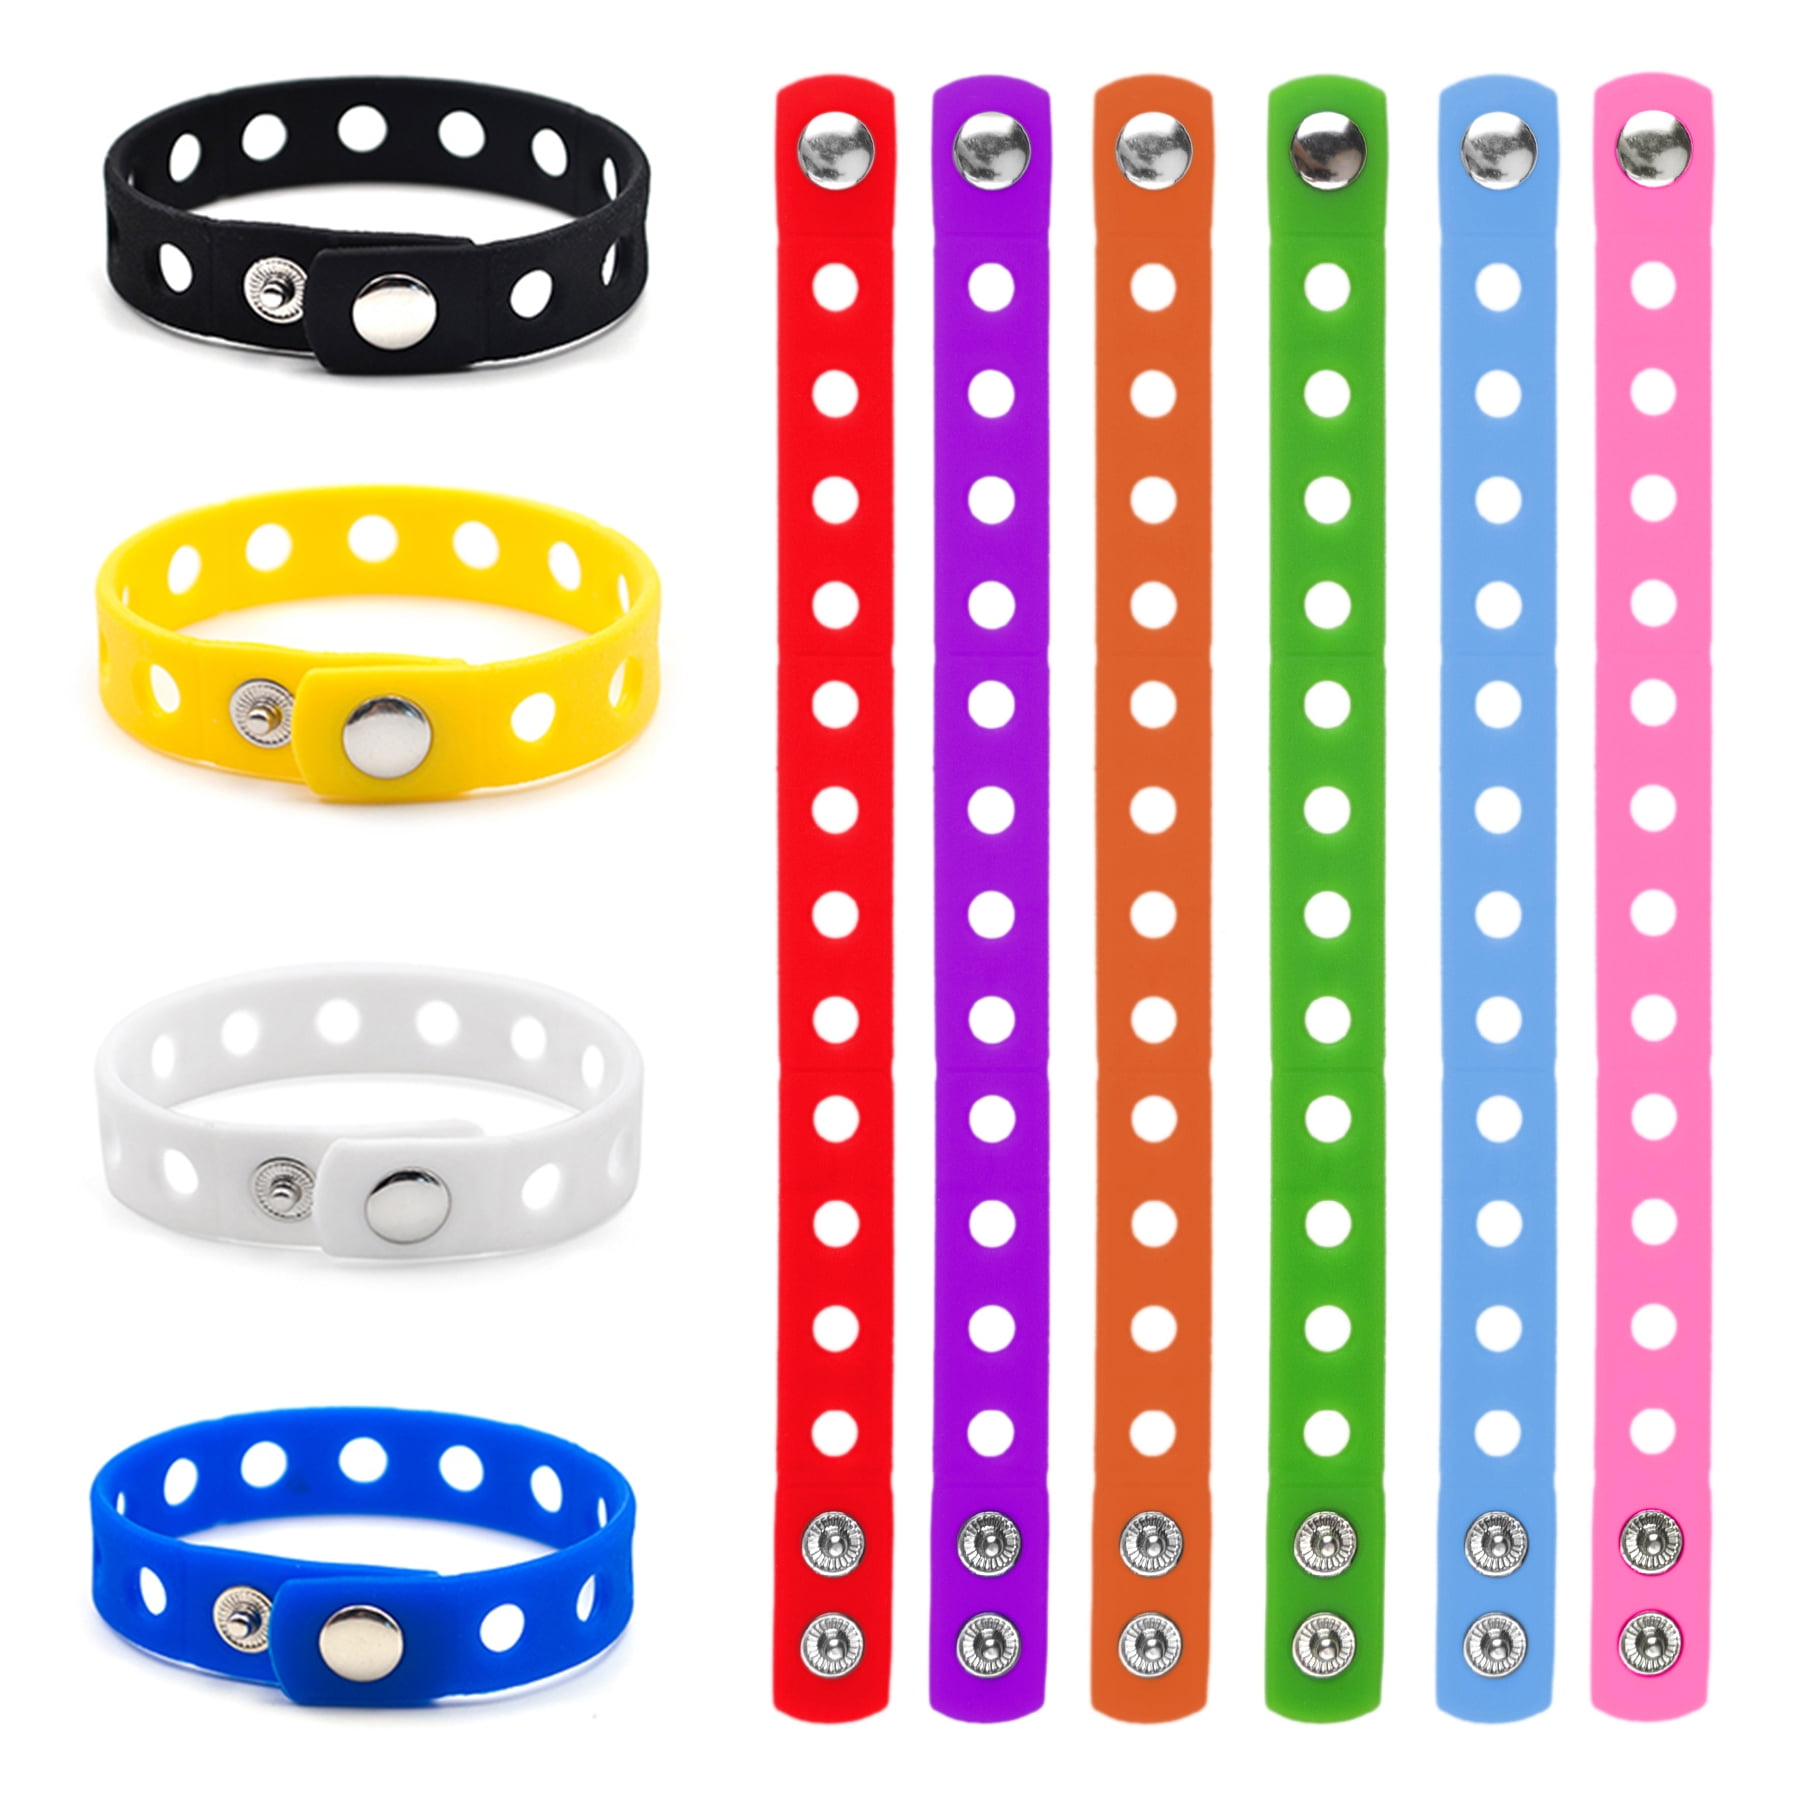 Details about   Shoe Charms Basketball for Crocs Clogs and Shoe Charm Wristbands Set of 4 